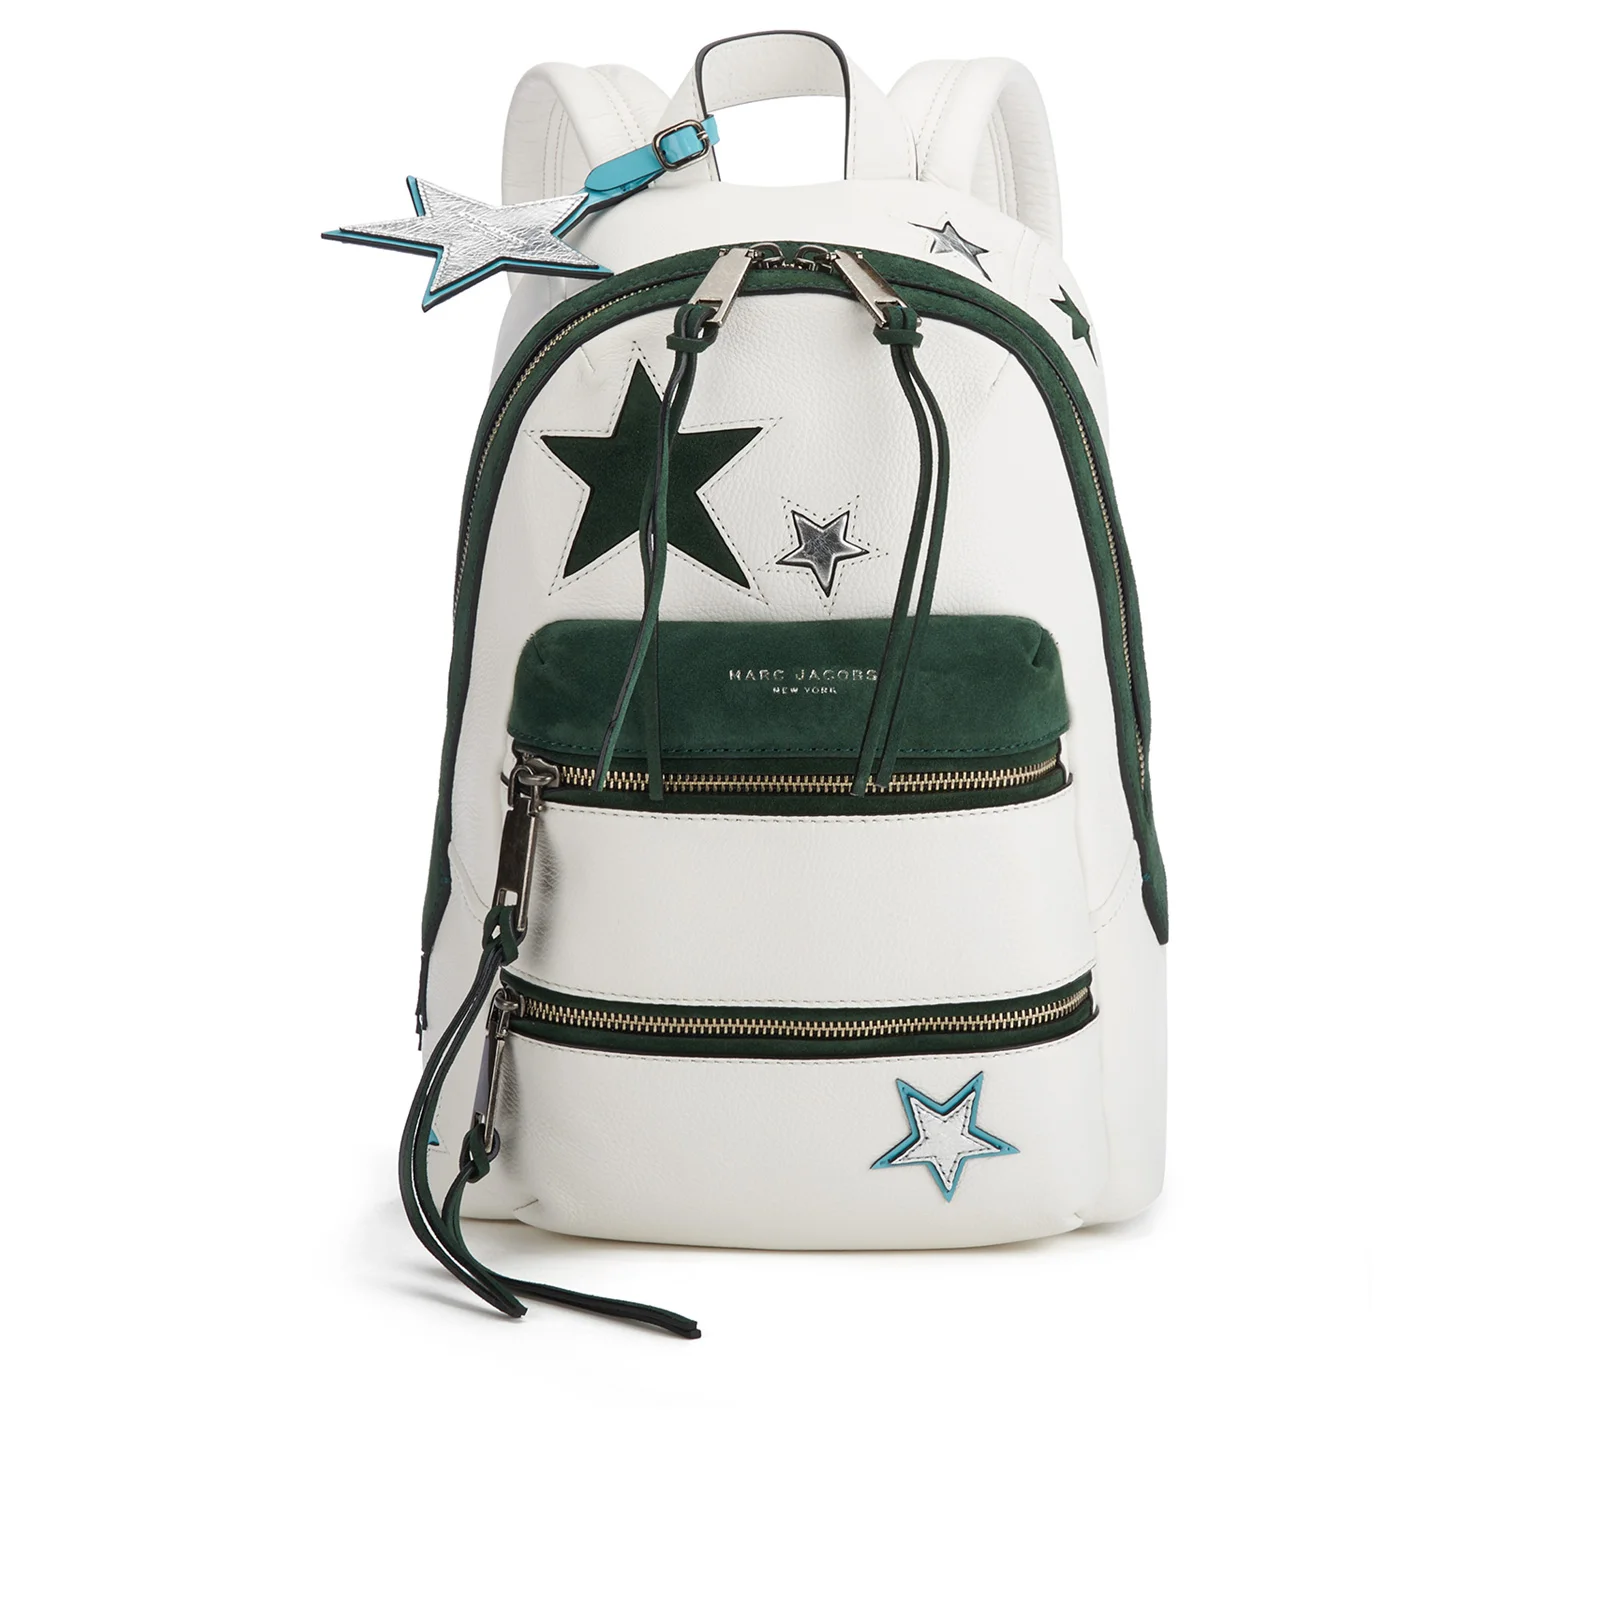 Marc Jacobs Women's Star Patchwork Backpack - White/Multi Image 1